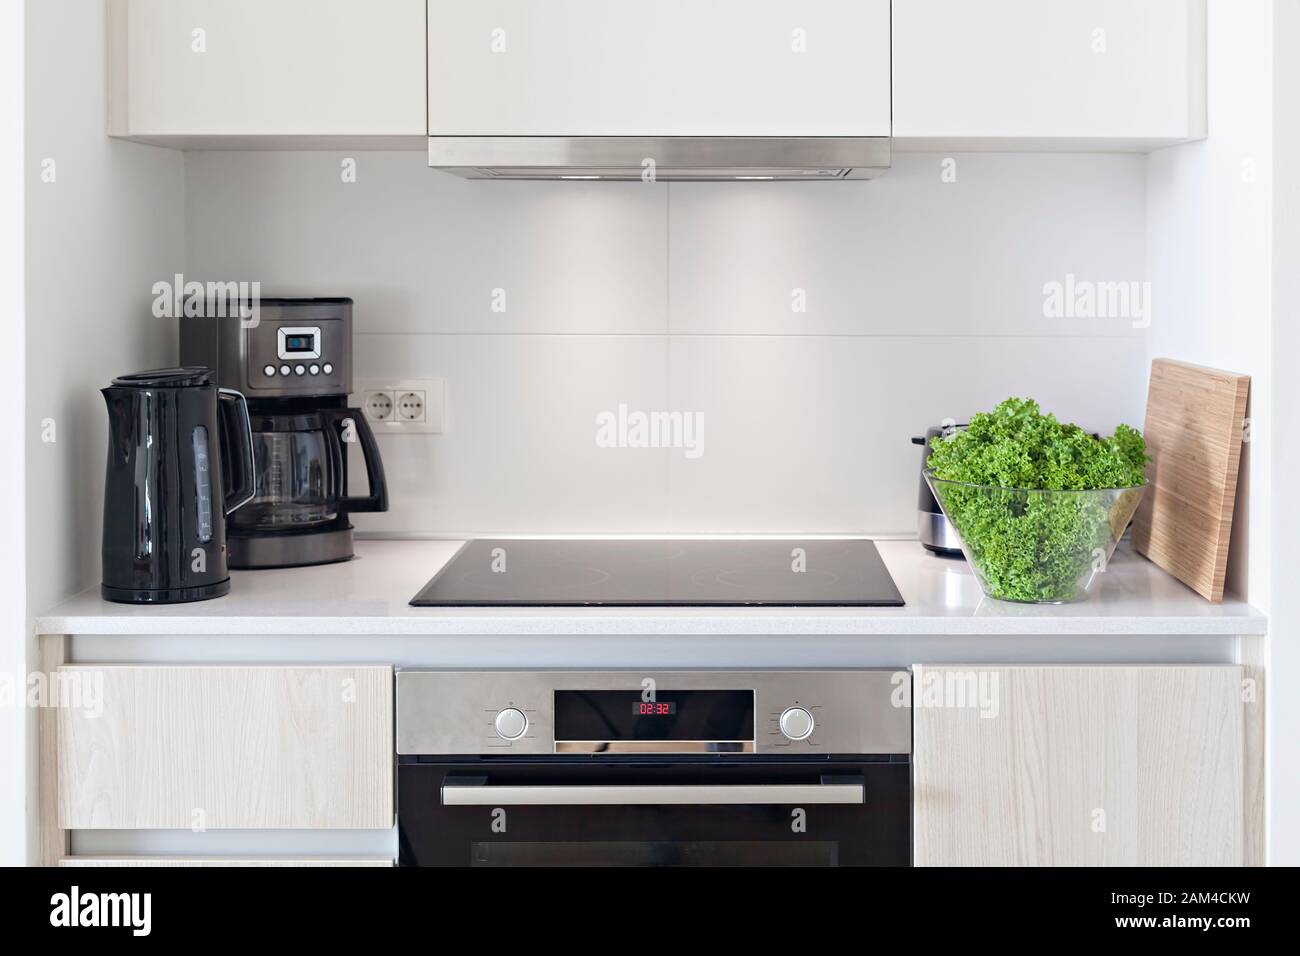 The interior of the kitchen with electric appliances, hood, kettler, coffee maker, stovetop and oven Stock Photo